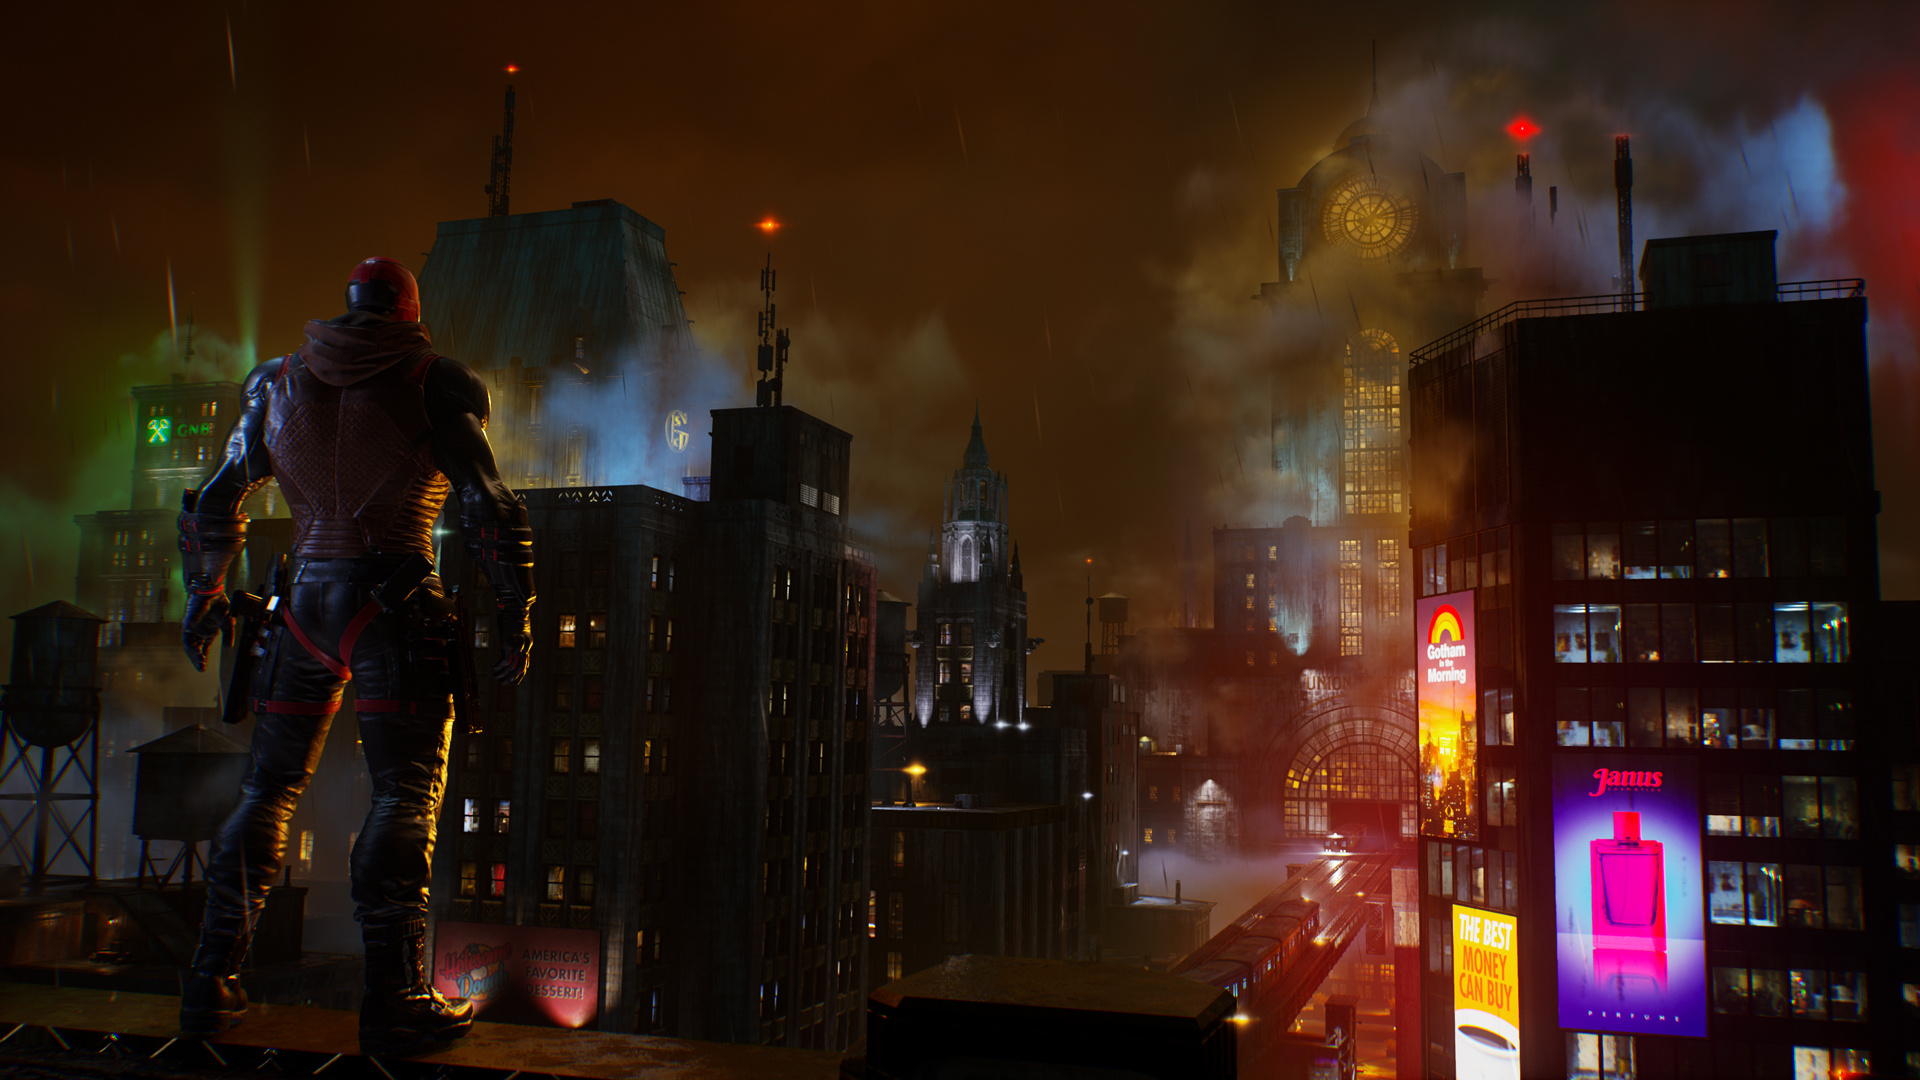 Gotham Knights Sounds Like One of the Most Exciting PS5 Projects Yet